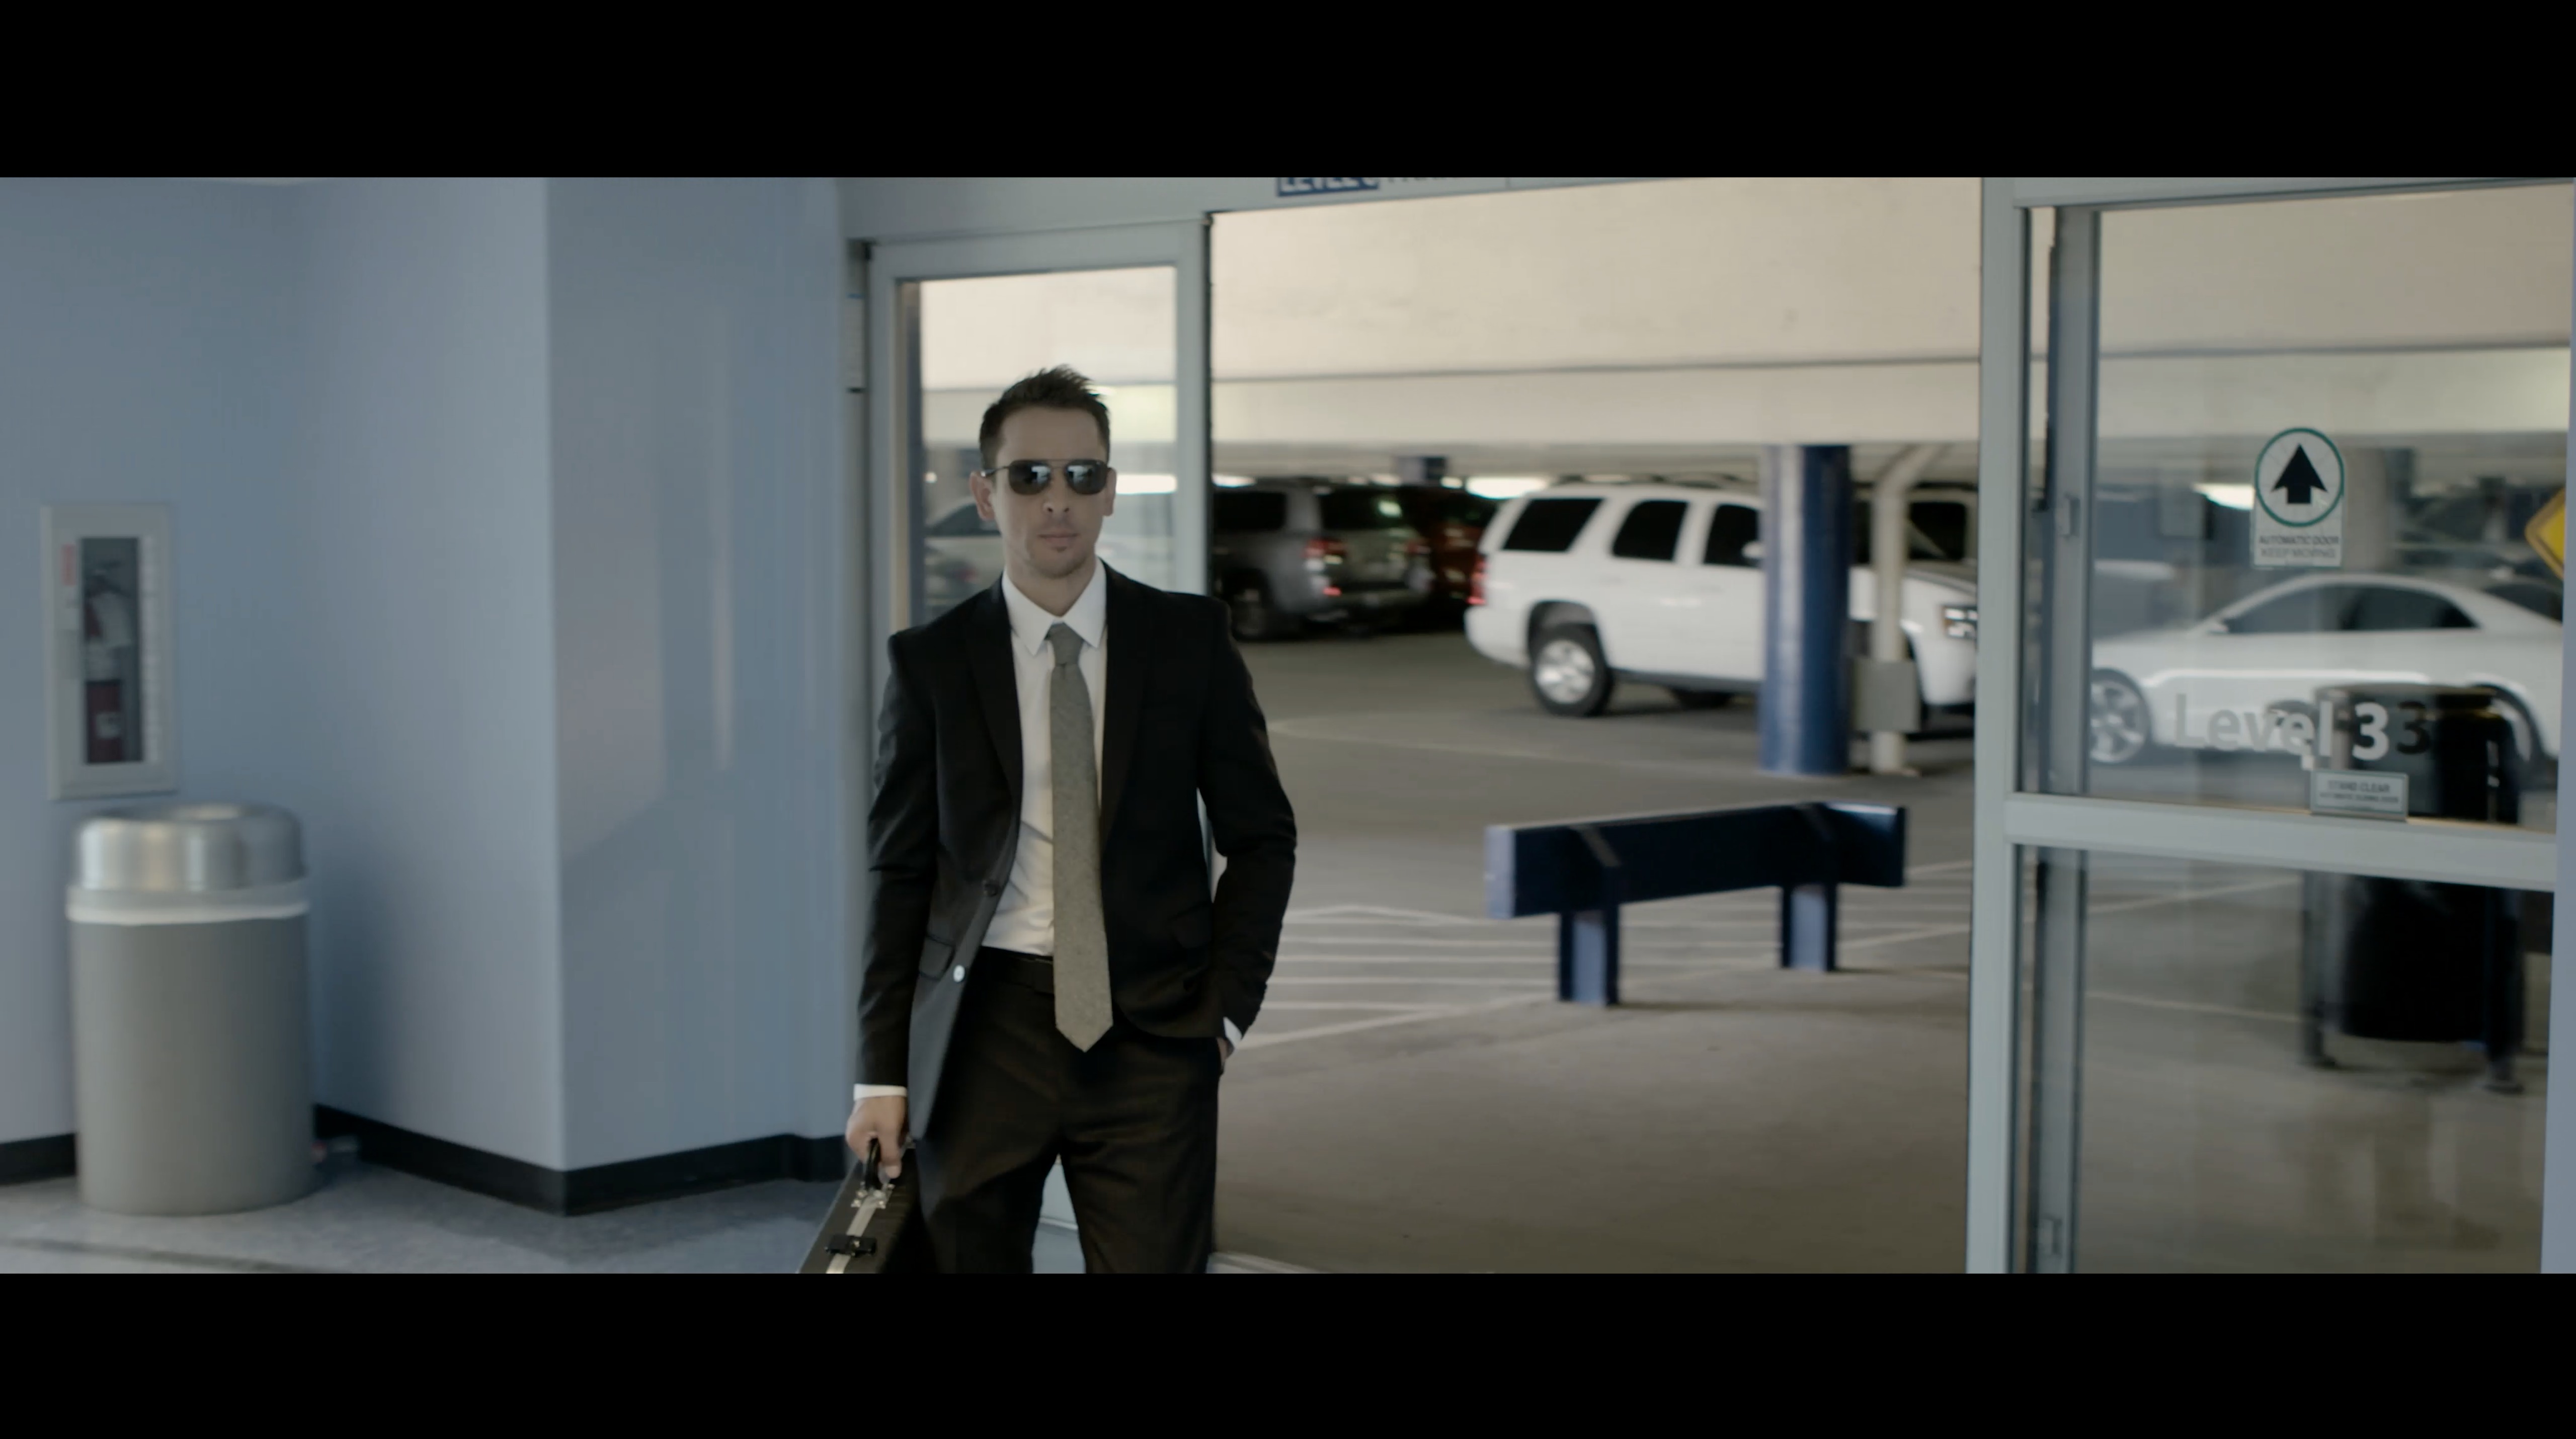 Still of actor Randy Shoemake in Sle7endary Pictures production Siren City.